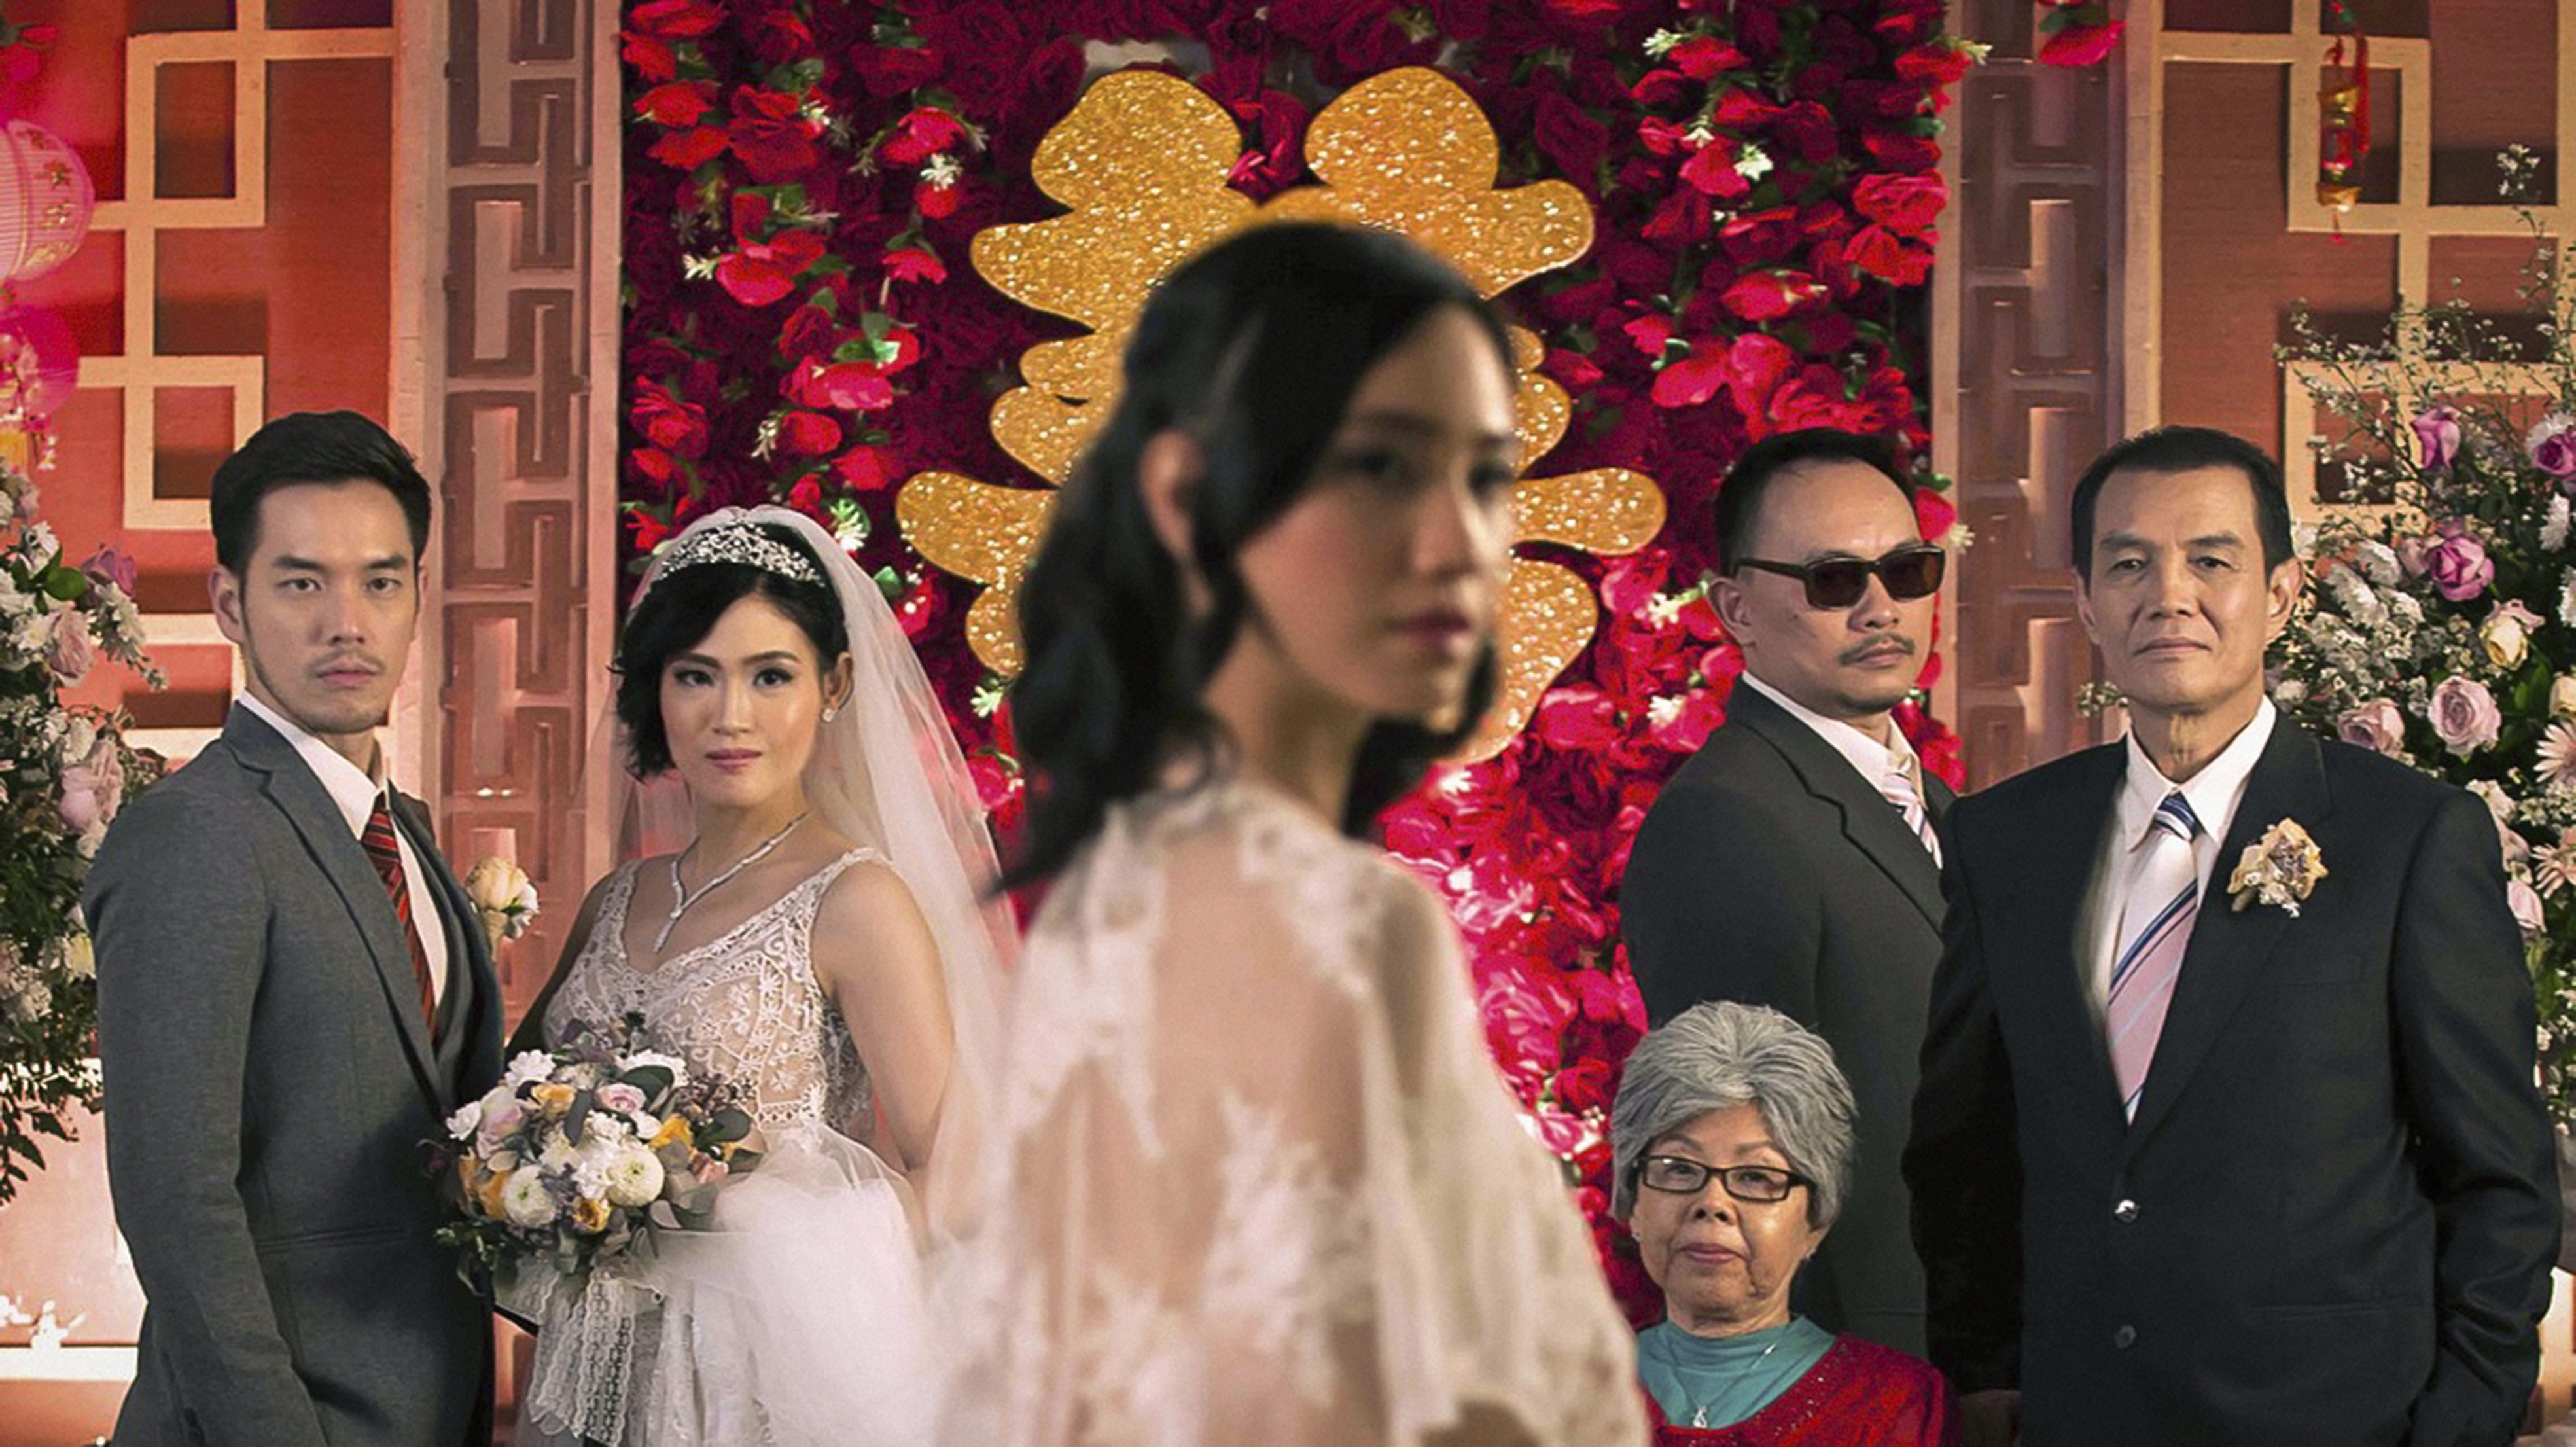 Chinese characters in Indonesian cinema either had exaggerated accents, or were corrupt businessmen exploiting workers in a whirl of lion dances and firecrackers. Film directors like Sidi Saleh now want to give a true portrayal